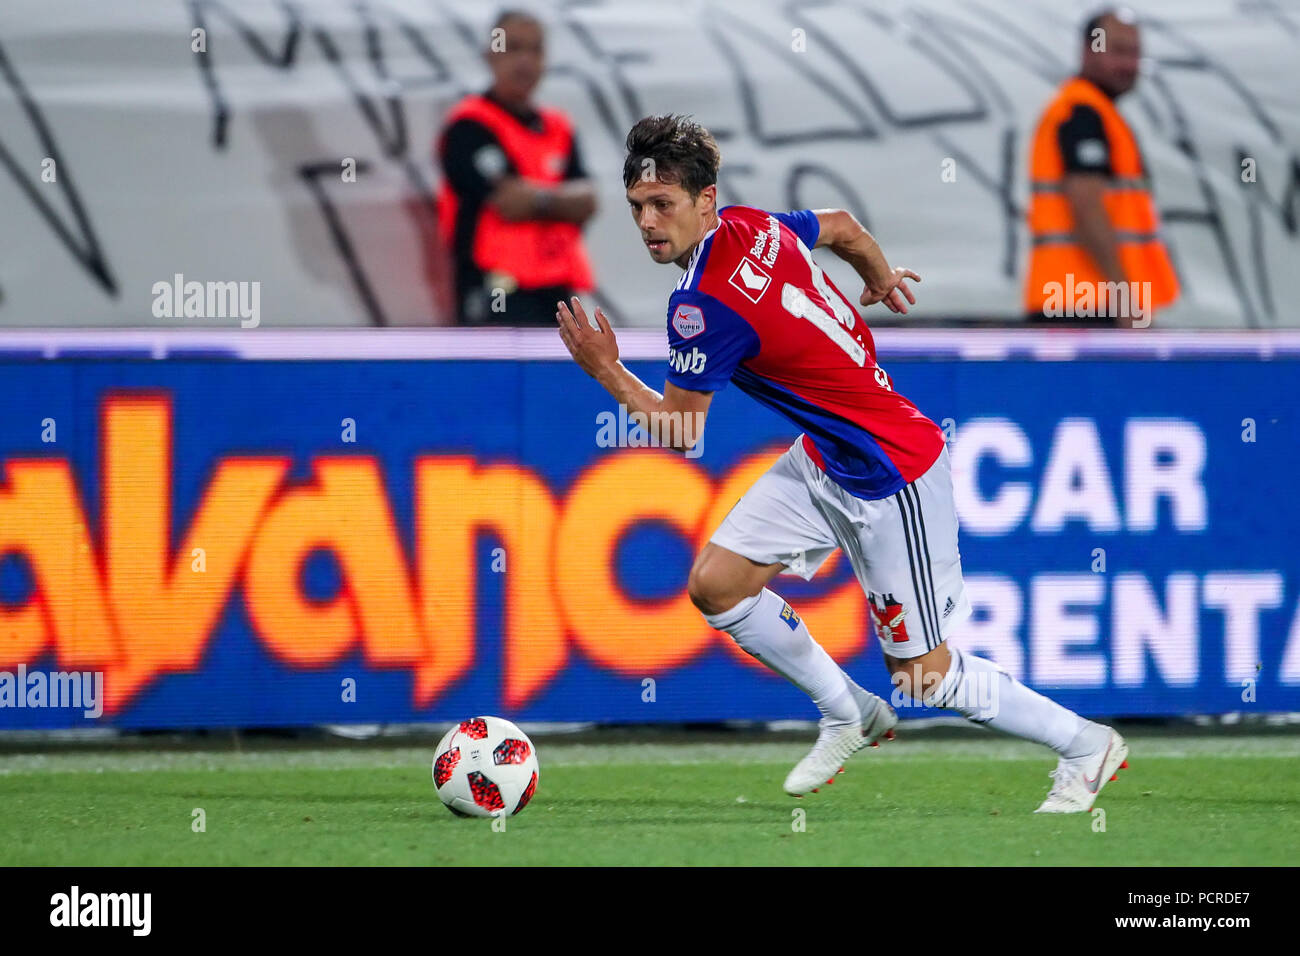 Thessaloniki, Greece - July 24, 2018: Player of Basel Valentin Stocker in action during the UEFA Champions League Second qualifying round , 1st  match Stock Photo